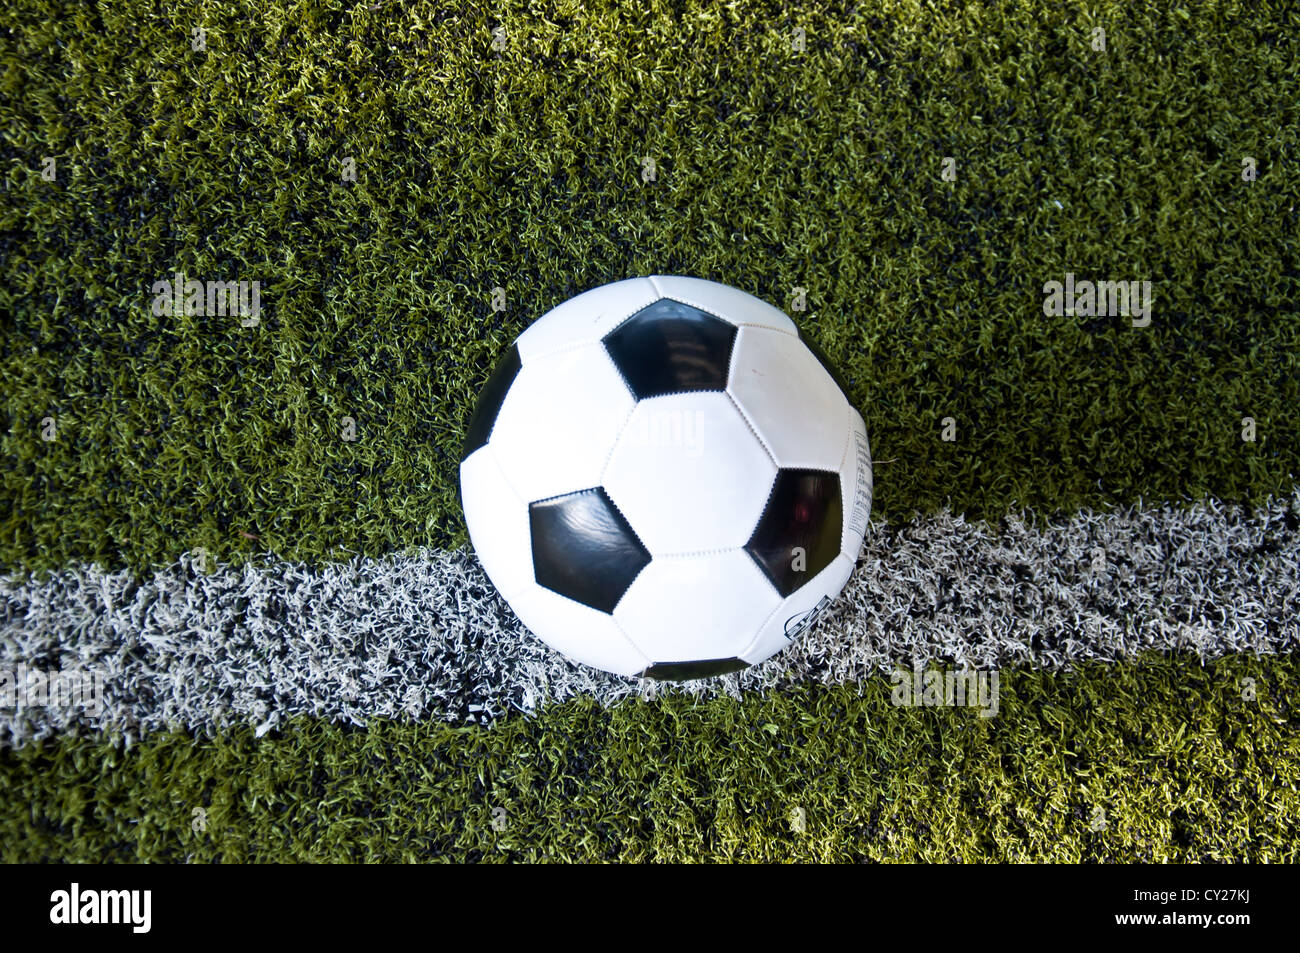 ball on white line of artificial grass indoor football field Stock Photo